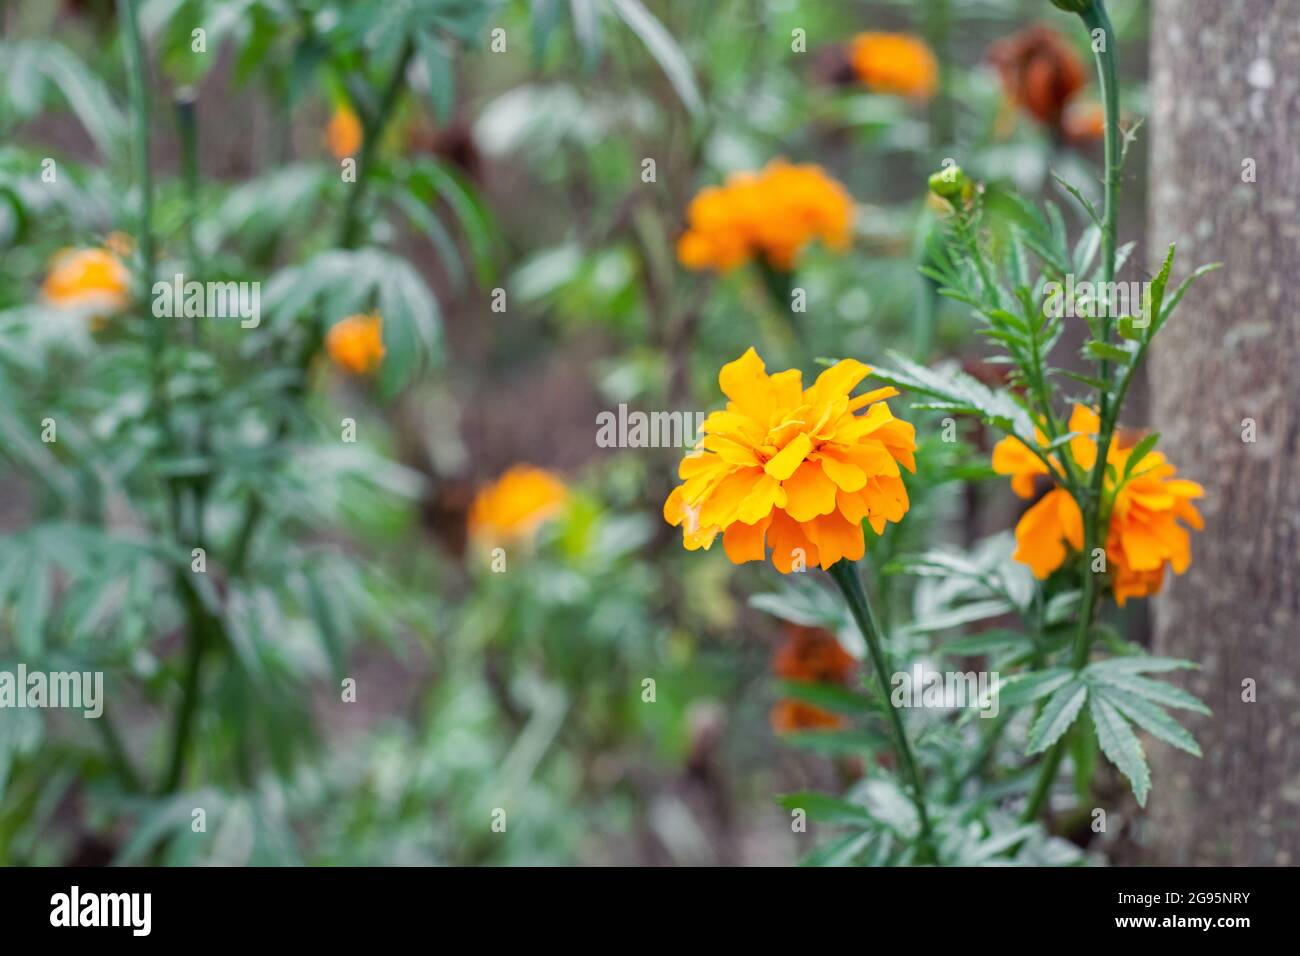 Tagetes erecta, flower with yellow petals and green leaves native to Mexico, where it is found in the wild mainly  in the states of Chiapas, Mexico, M Stock Photo